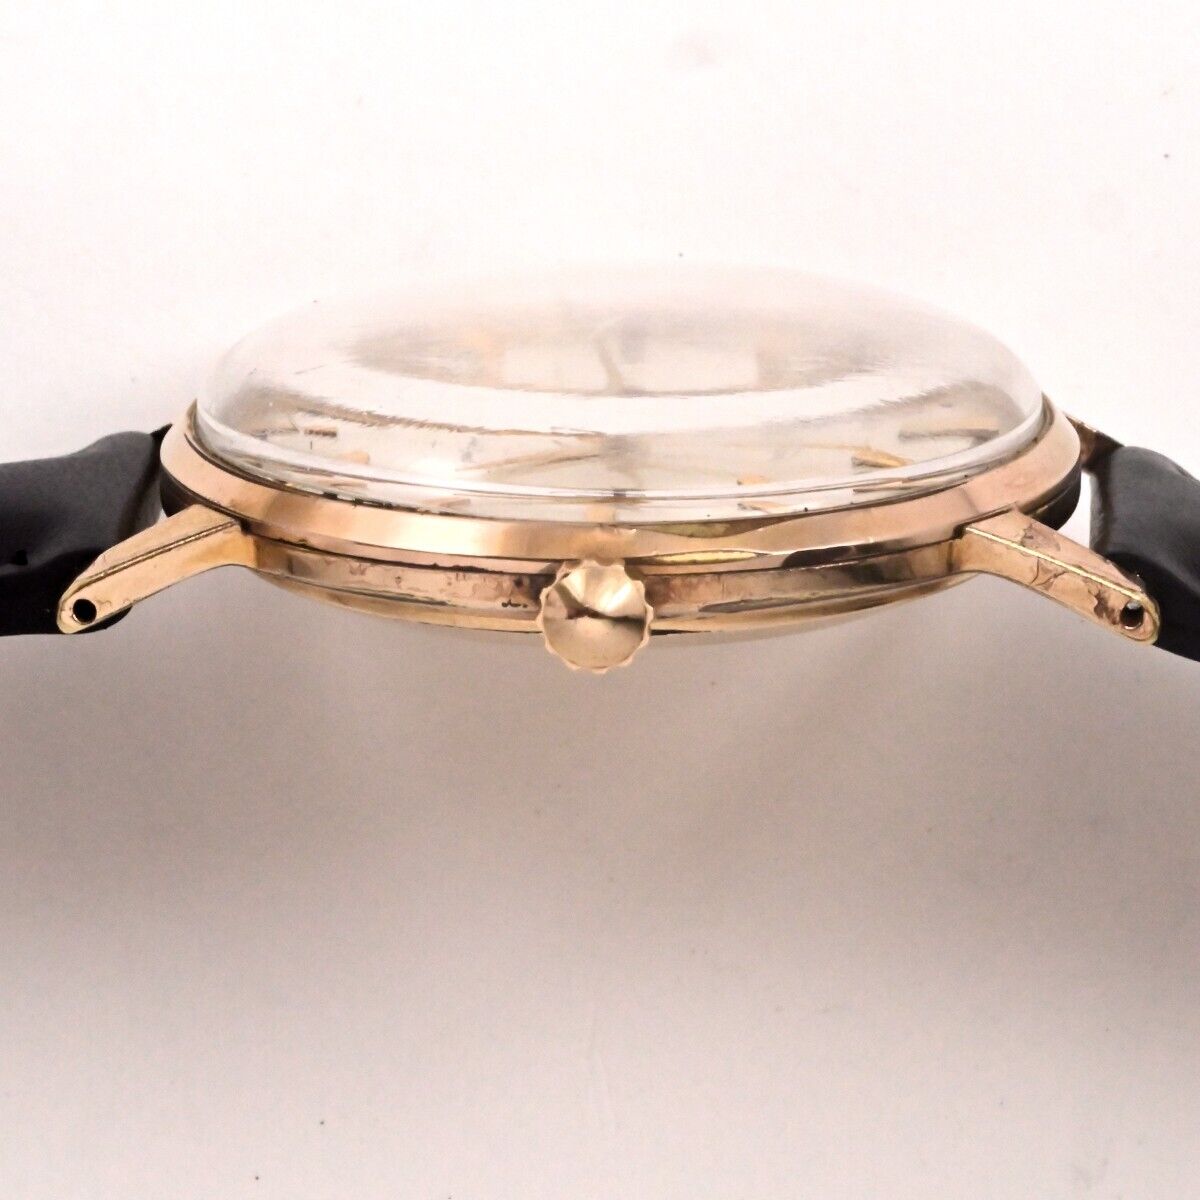 Vintage SEIKO CROWN 21 Jewels Hand-Winding Gold Filled J15003E